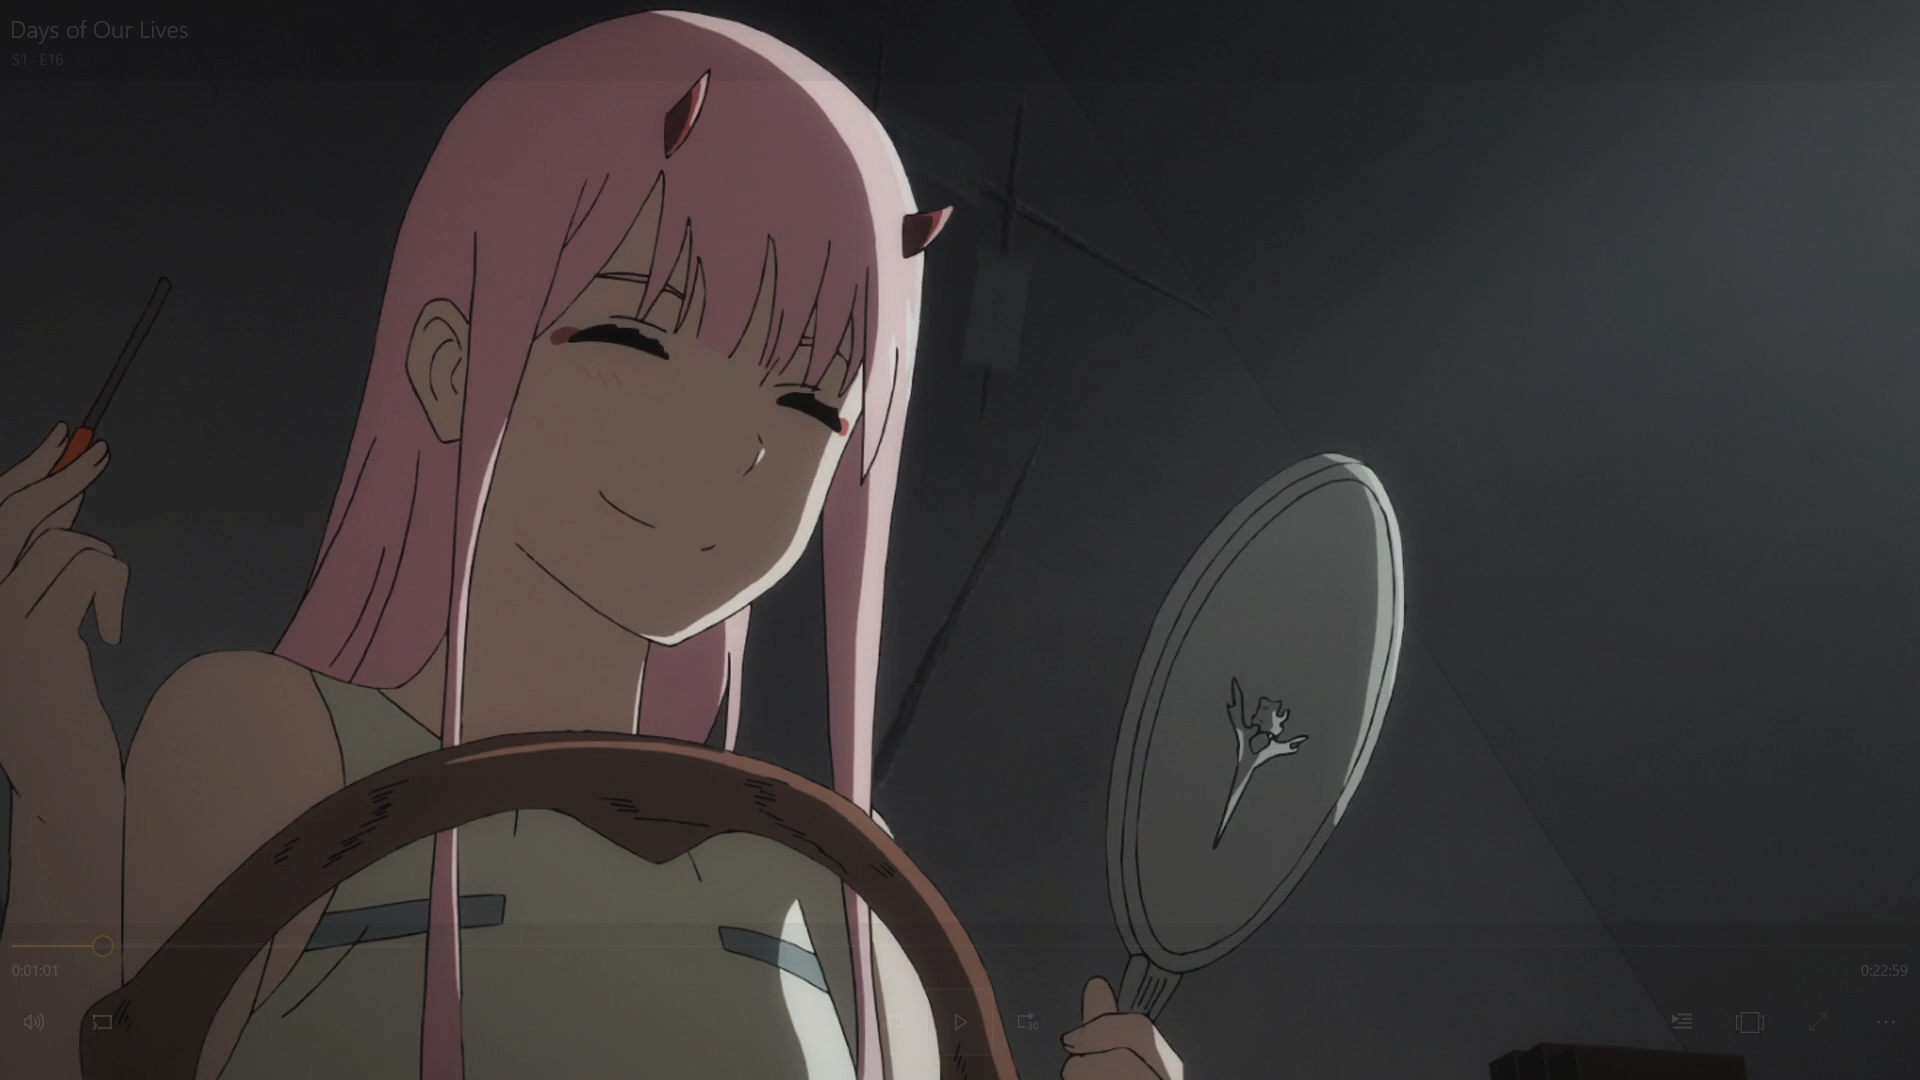 Darling in the Franxx EP16 assets